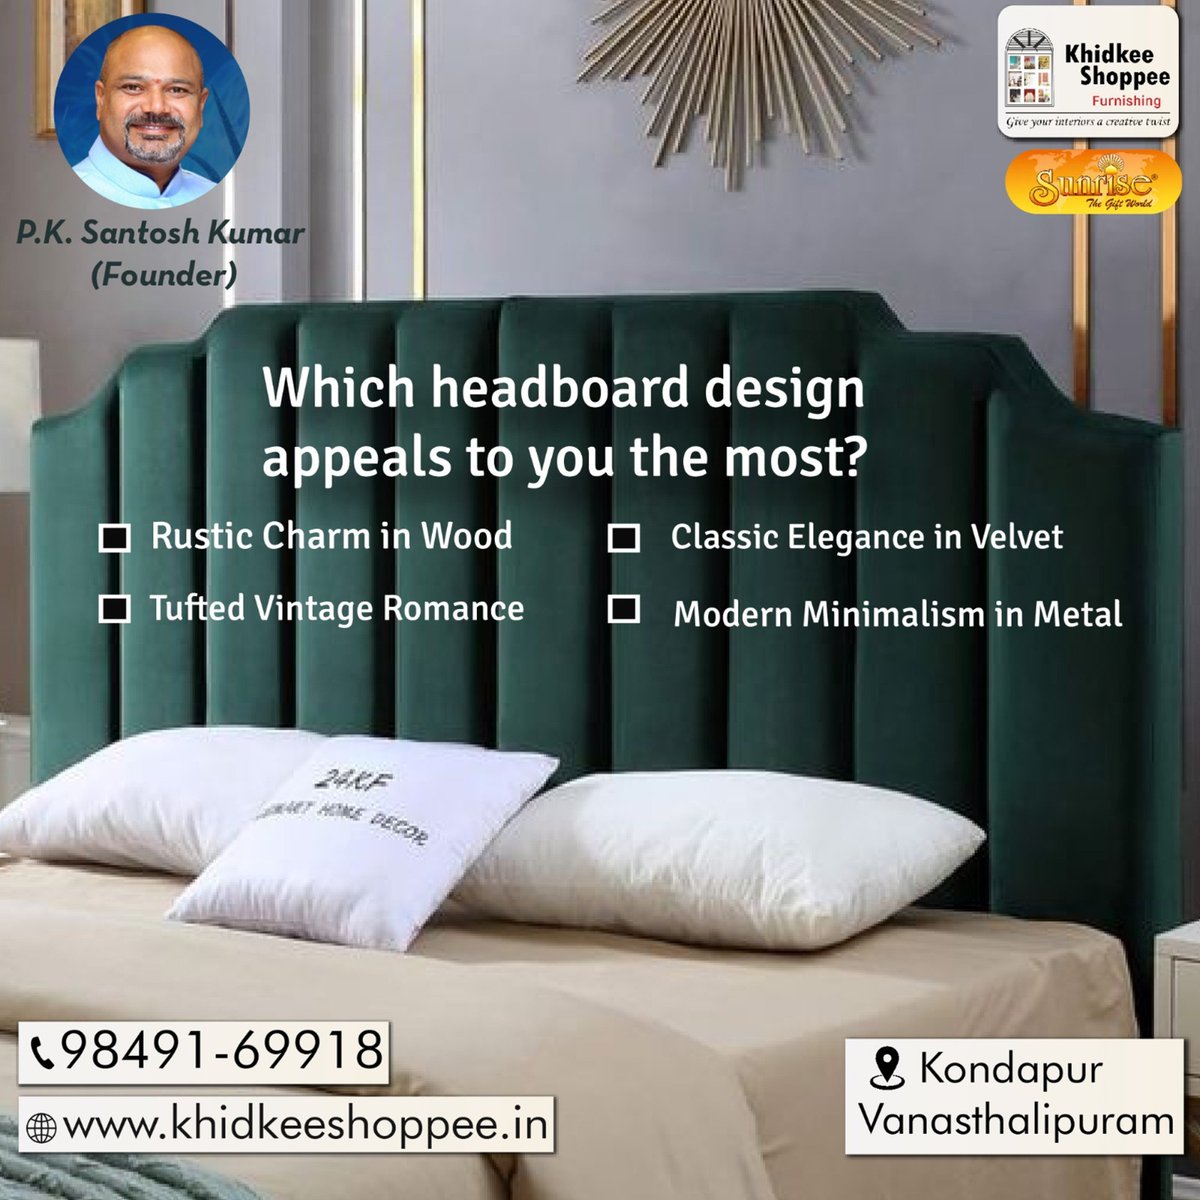 Dreaming of the perfect headboard? Share your favorite design and let's make it a reality! 💤💕
#KhidkeeShoppee #homedecorinspiration #homefurnishingstore #PamperYourself #bed #bedroom #bedtime #bedroomdecor #bedding #bedroominspo #bedandbreakfast #bedroomdesign #Hyderabad